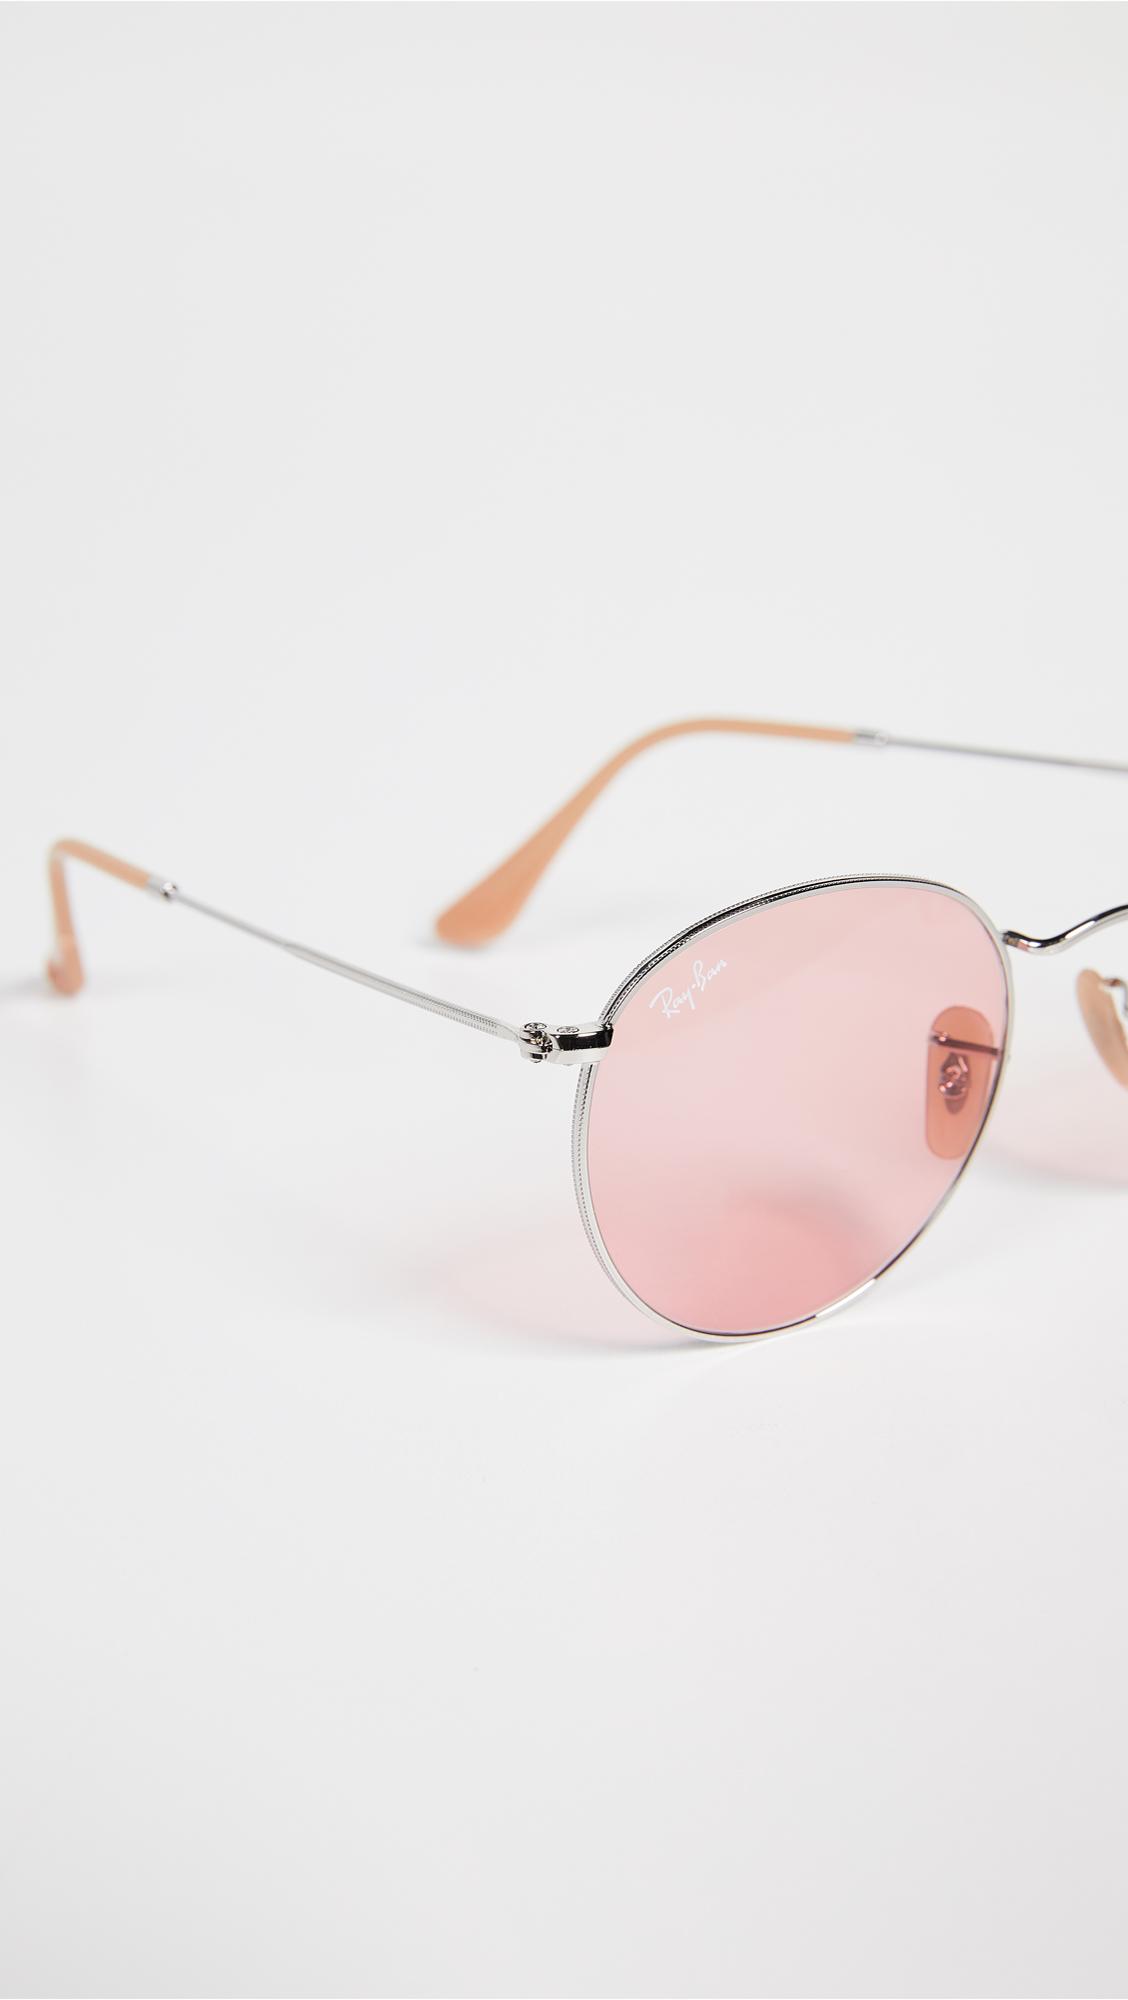 Ray-Ban Rb3447 Round Metal Evolve Sunglasses in Silver/Pink (Pink) - Lyst